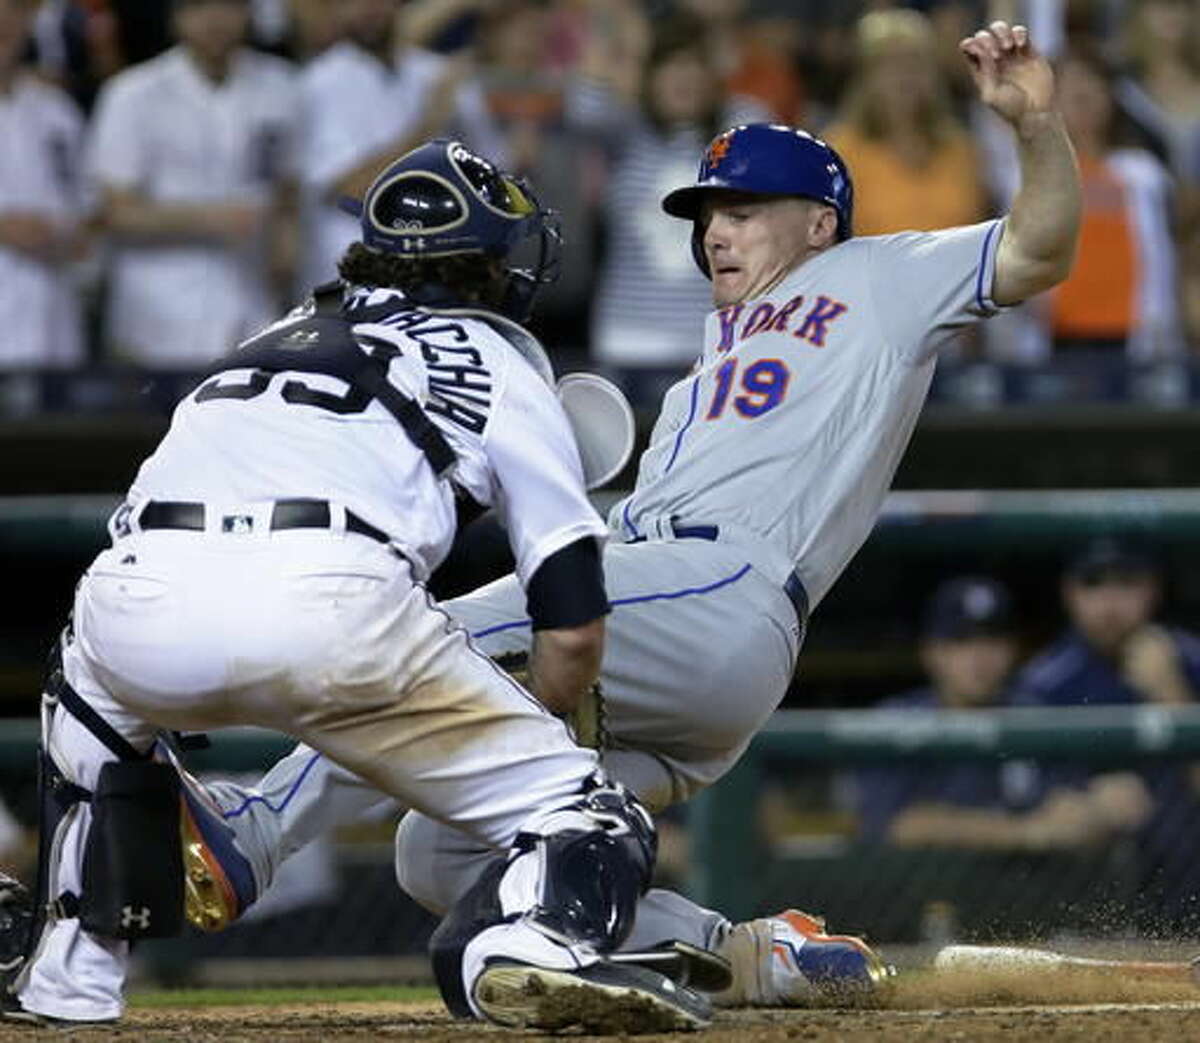 New York Mets' Jay Bruce (19) slides into the tag from Detroit Tigers catcher Jarrod Saltalamacchia while trying to score from second base during the ninth inning of an interleague baseball game Saturday, Aug. 6, 2016, in Detroit. The Tigers defeated the Mets 6-5. (AP Photo/Duane Burleson)